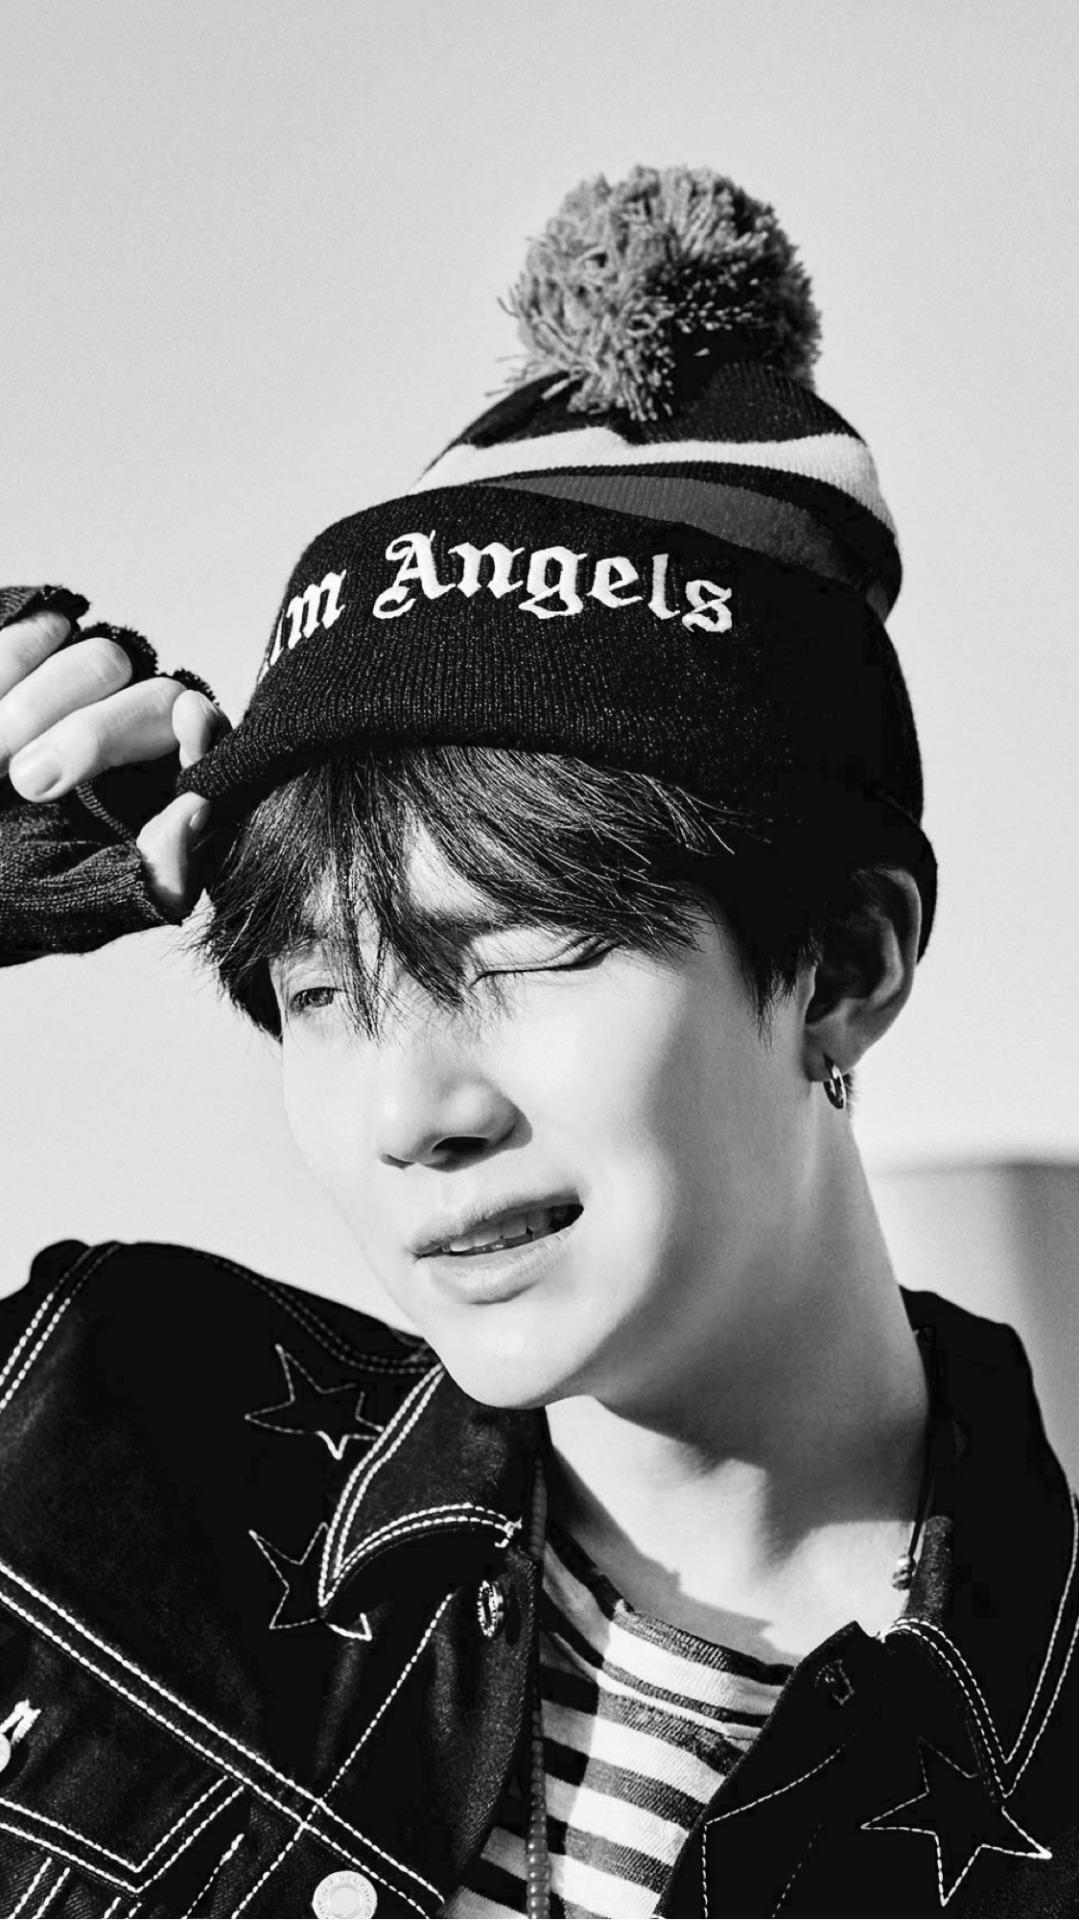 Bts Suga Wallpaper Group , Download for free